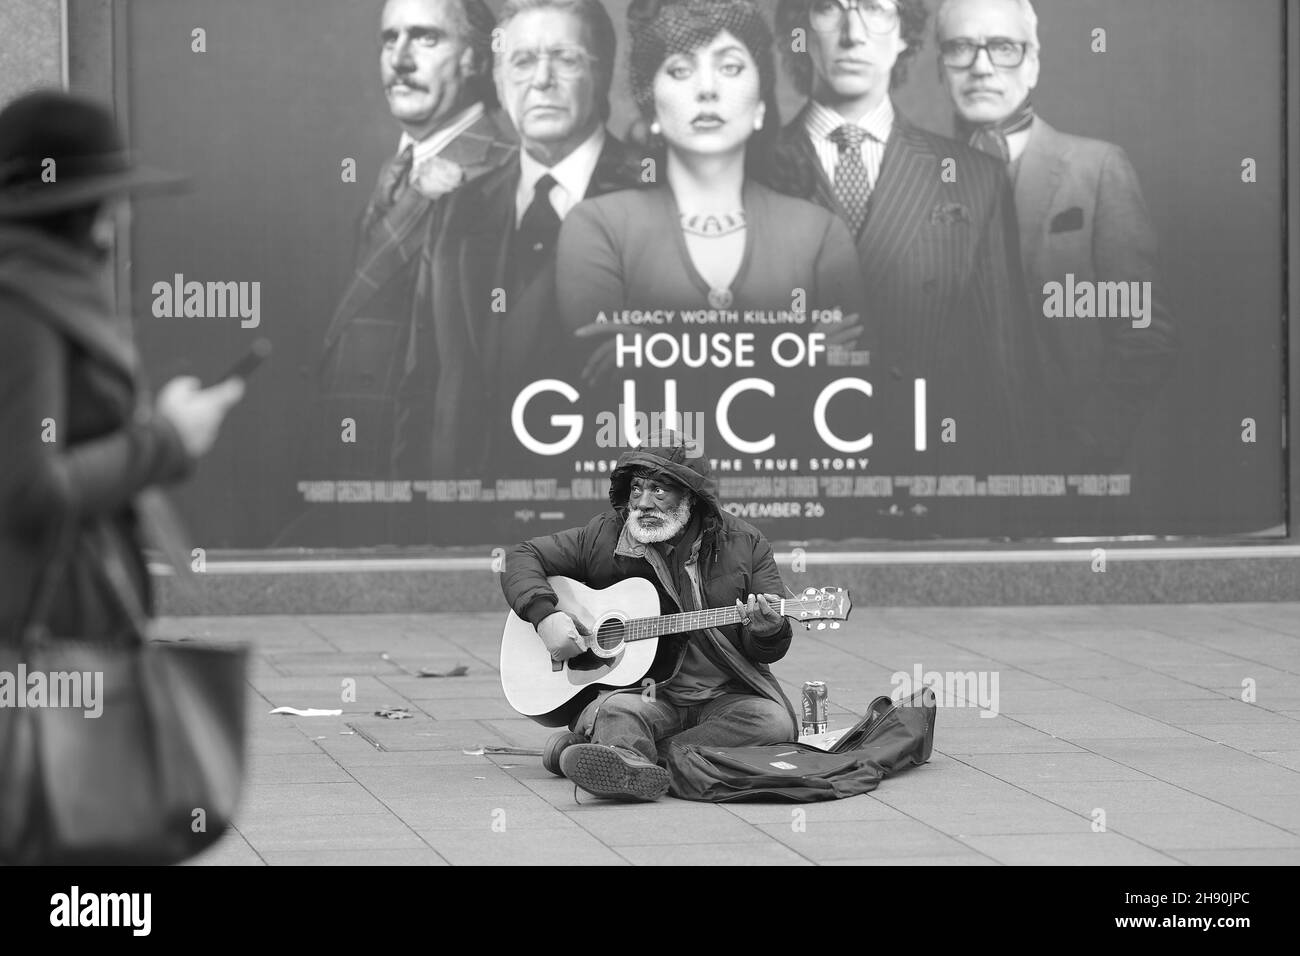 London, England, UK. Elderly black man busking/begging in Leicester Square in front of afilm poster for House of Gucci - December 2021 Stock Photo